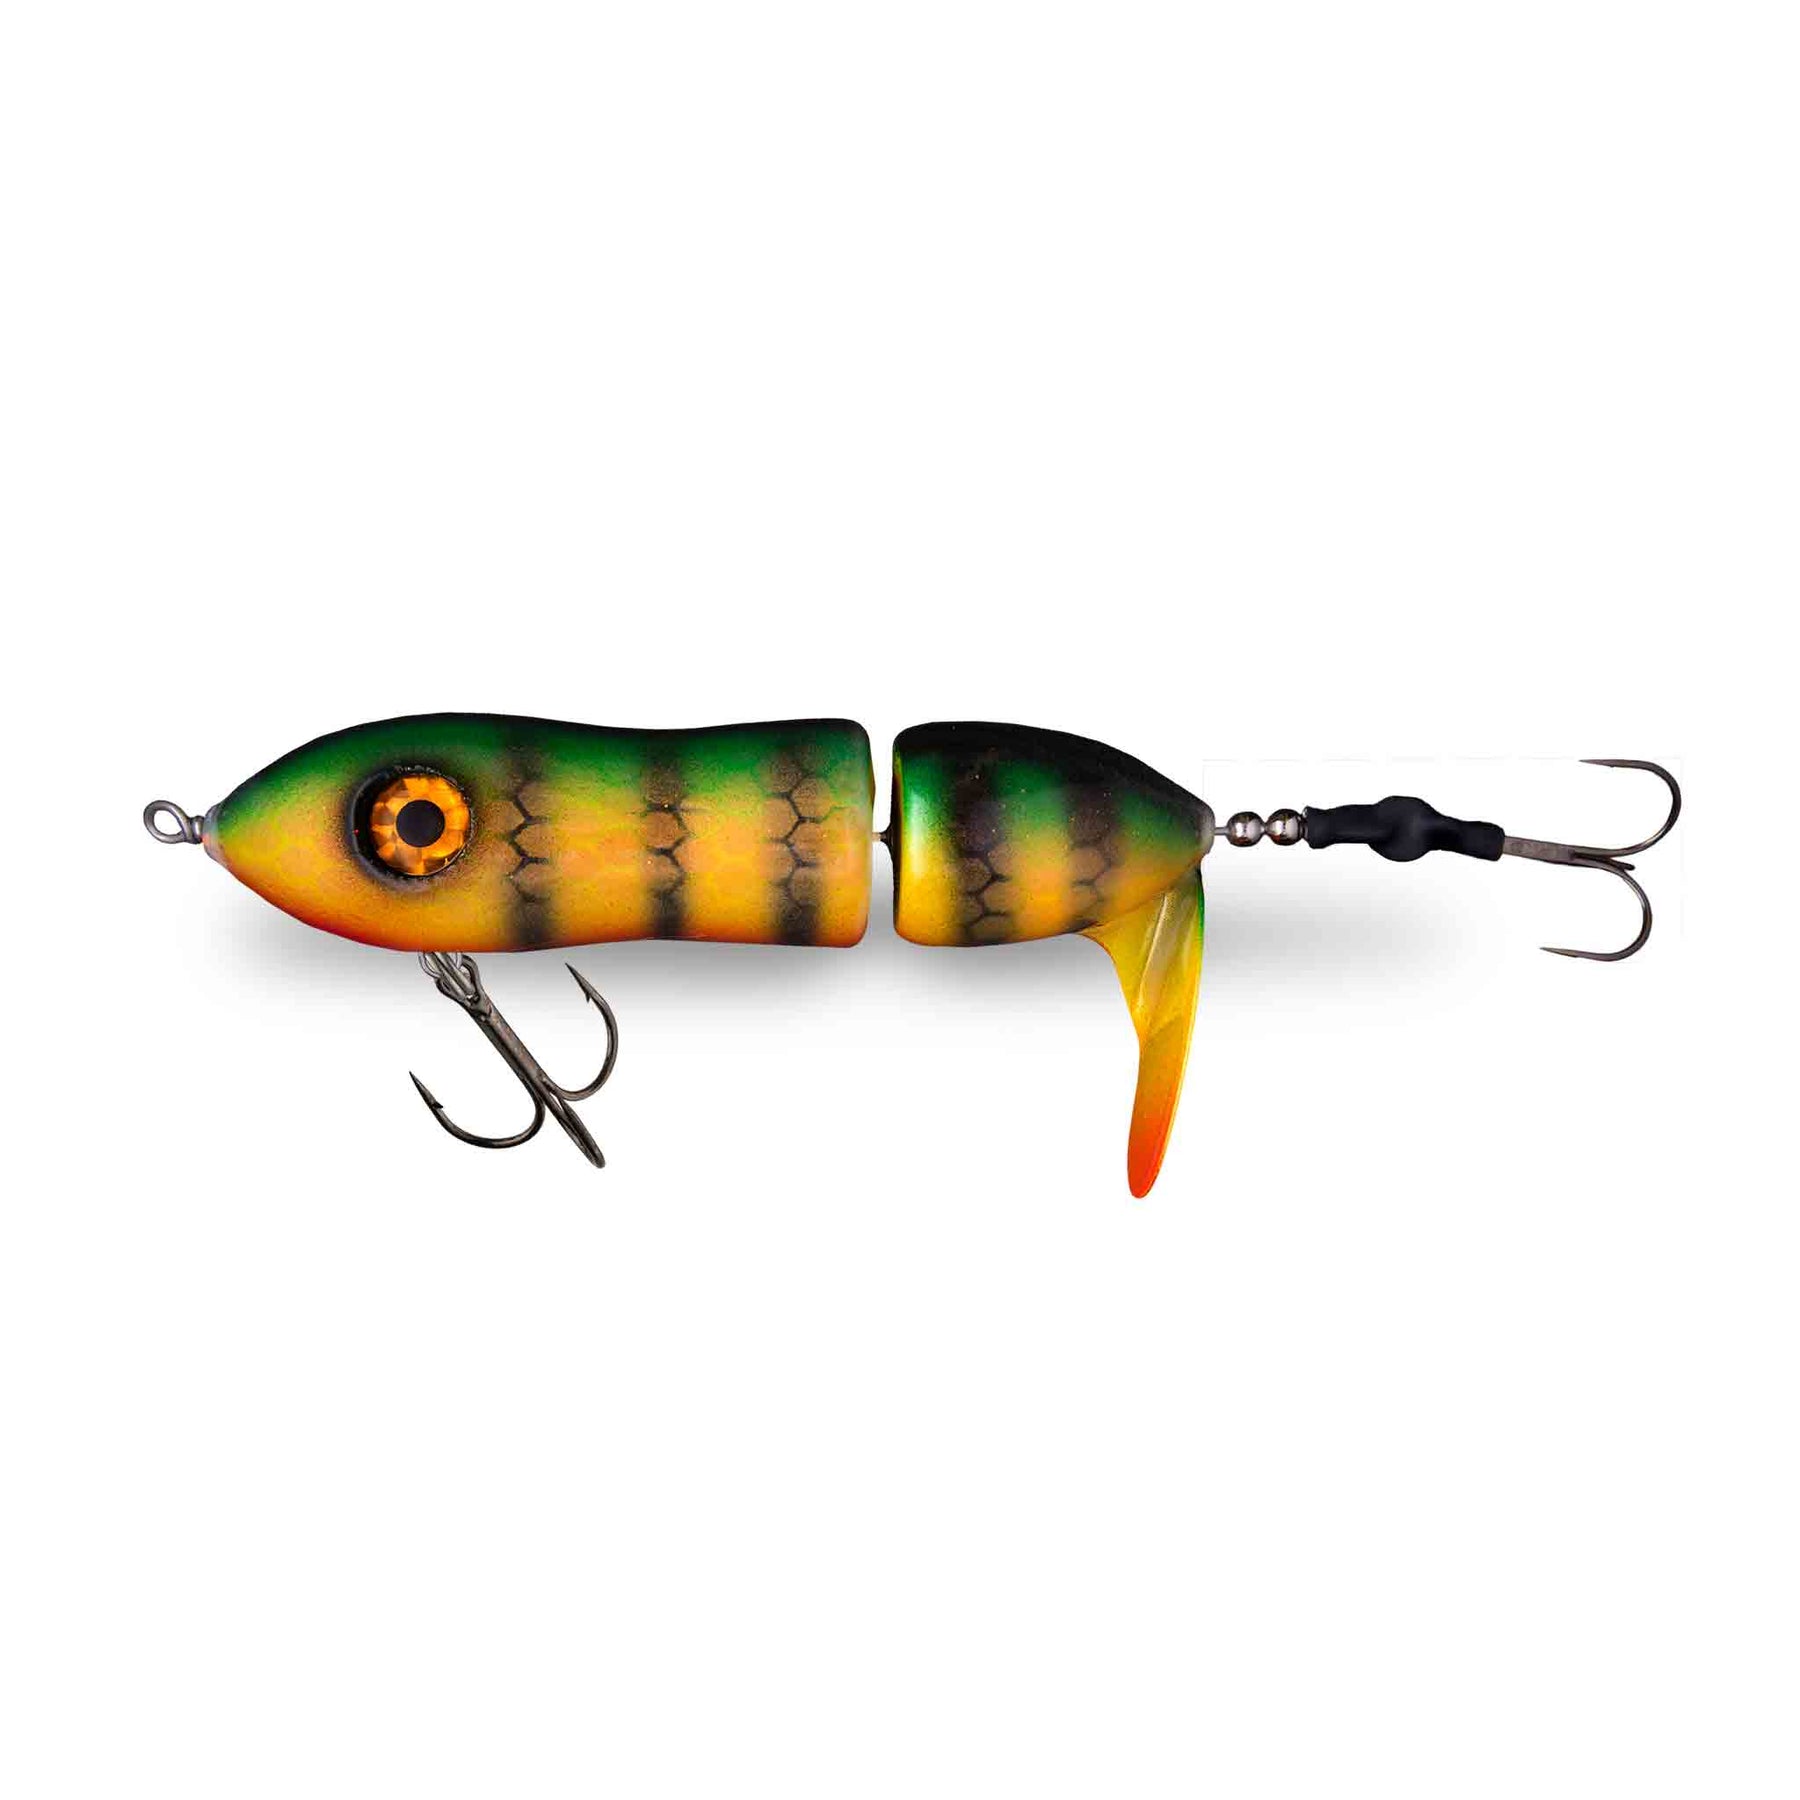 View of Topwater Big Mama Lit'tl Sis'tr Propbait Round Lake Perch available at EZOKO Pike and Musky Shop